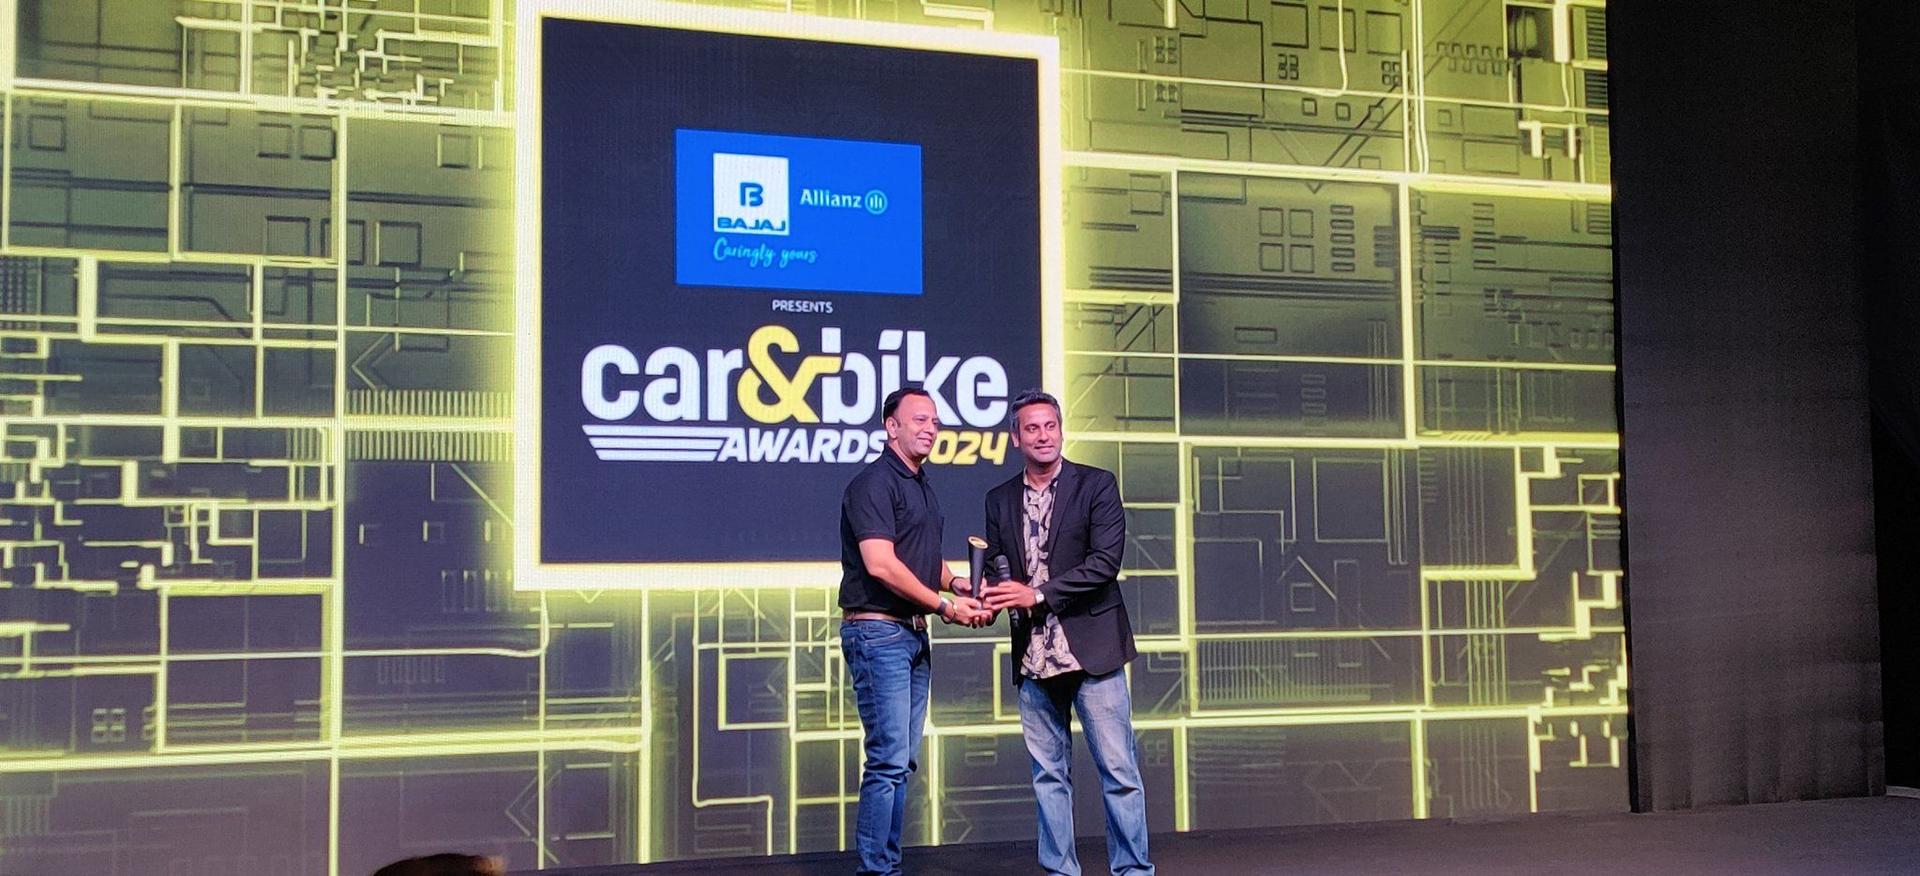 The Bajaj Pulsar N150 proved to be the best amongst the commuter motorcycle category at this year’s car&bike awards. It faced tough competition from the Honda duo of Shine 100 and SP160. 